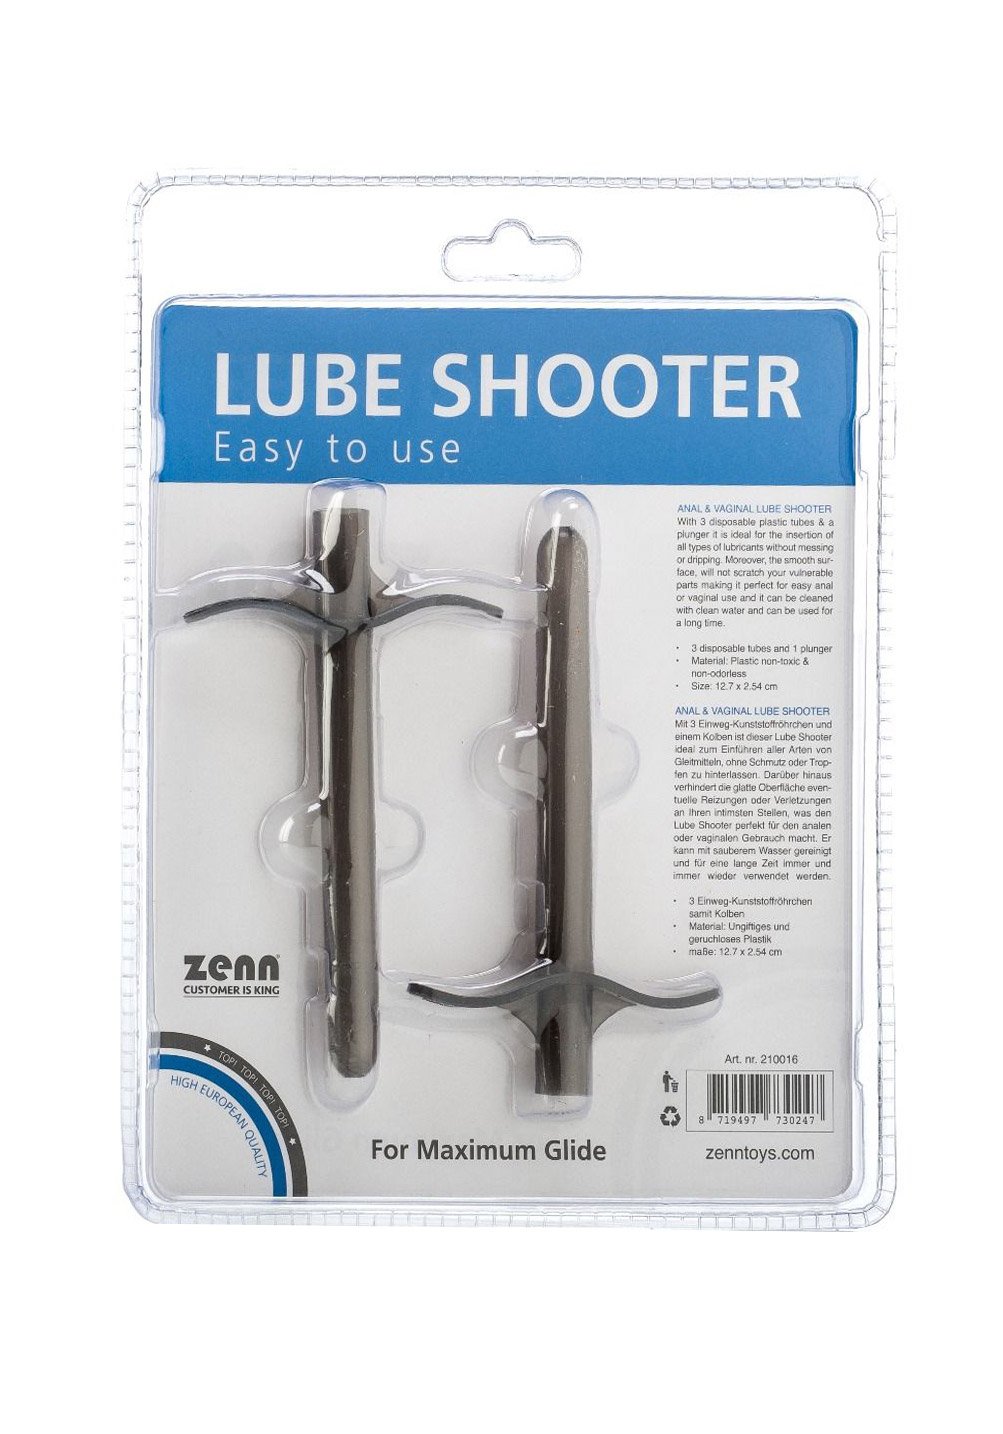 Lube Shooter